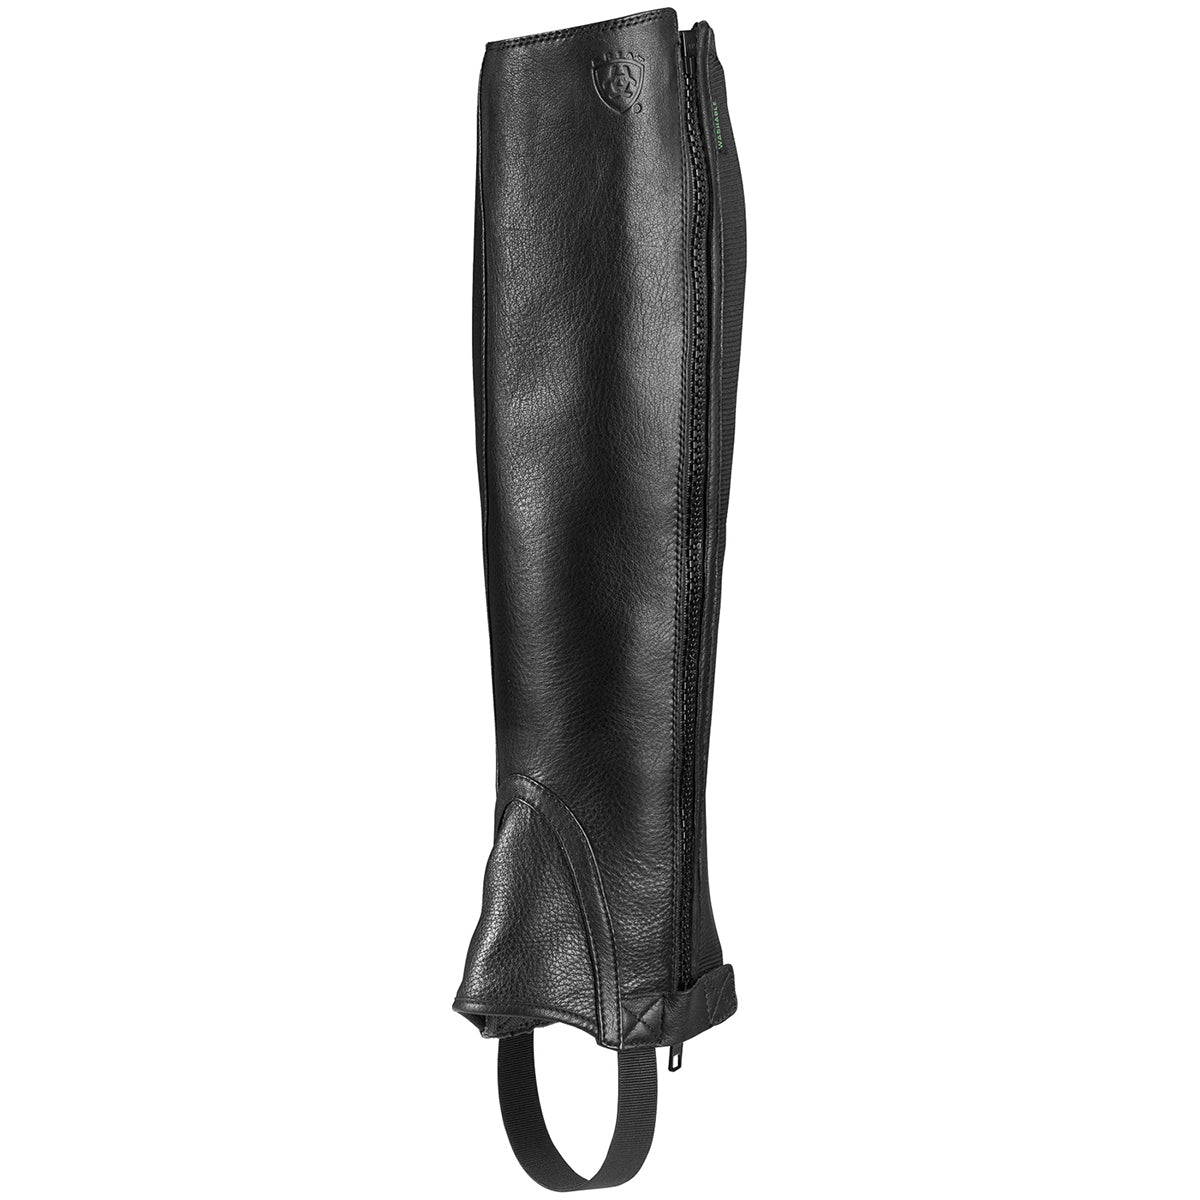 Unisex Ariat Breeze Half Chap in Black from the front